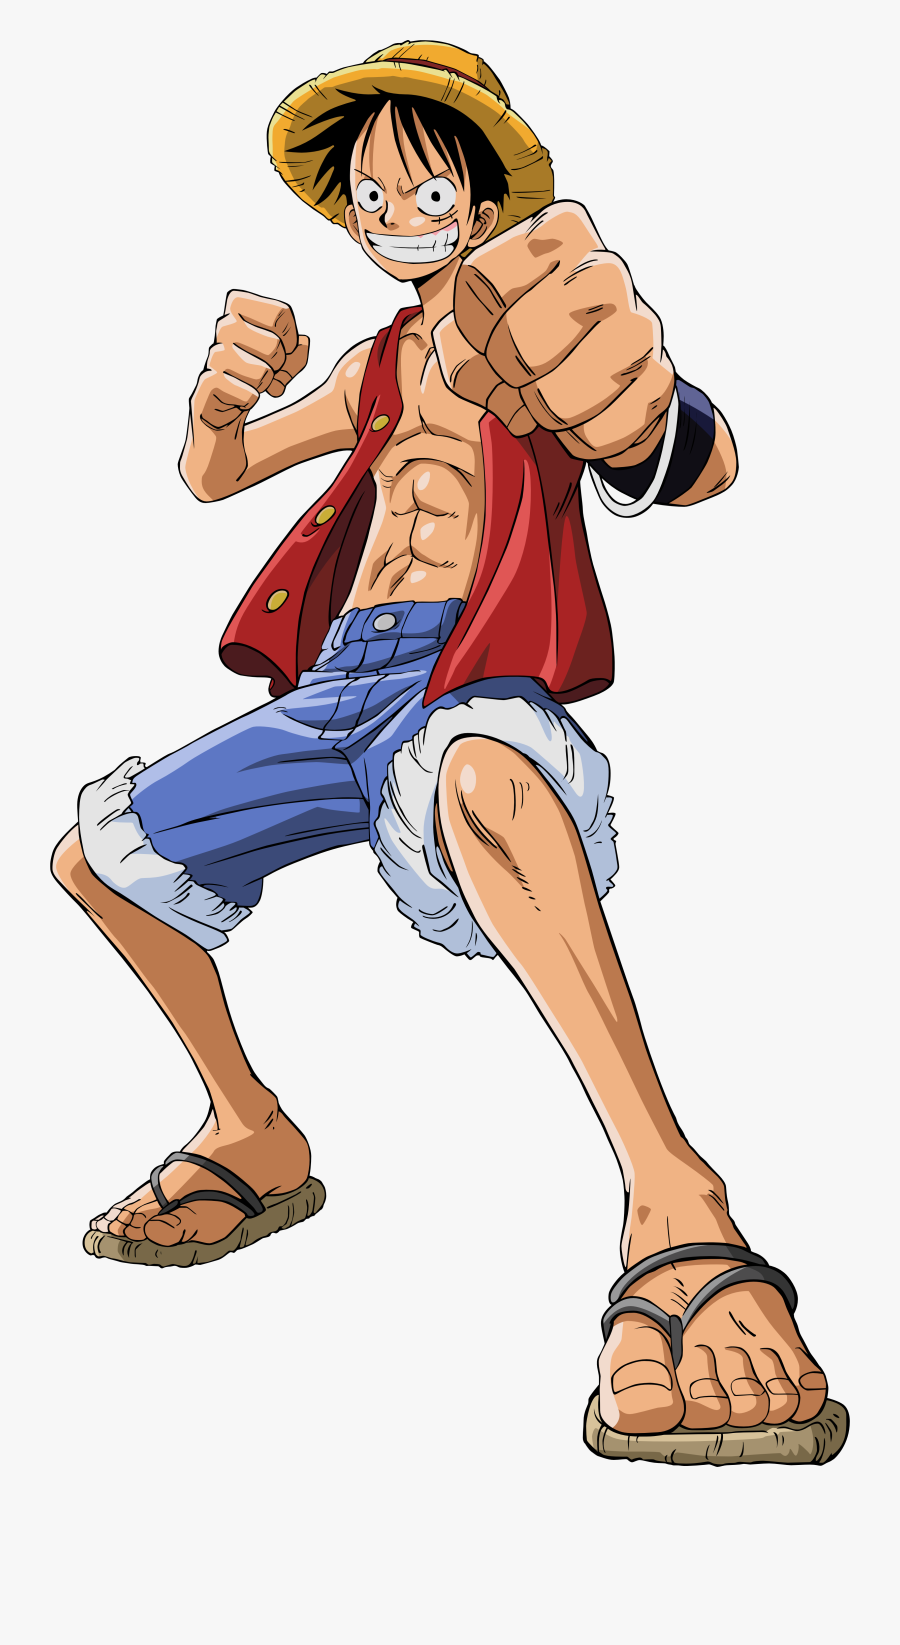 One Piece Luffy Png, Transparent Clipart